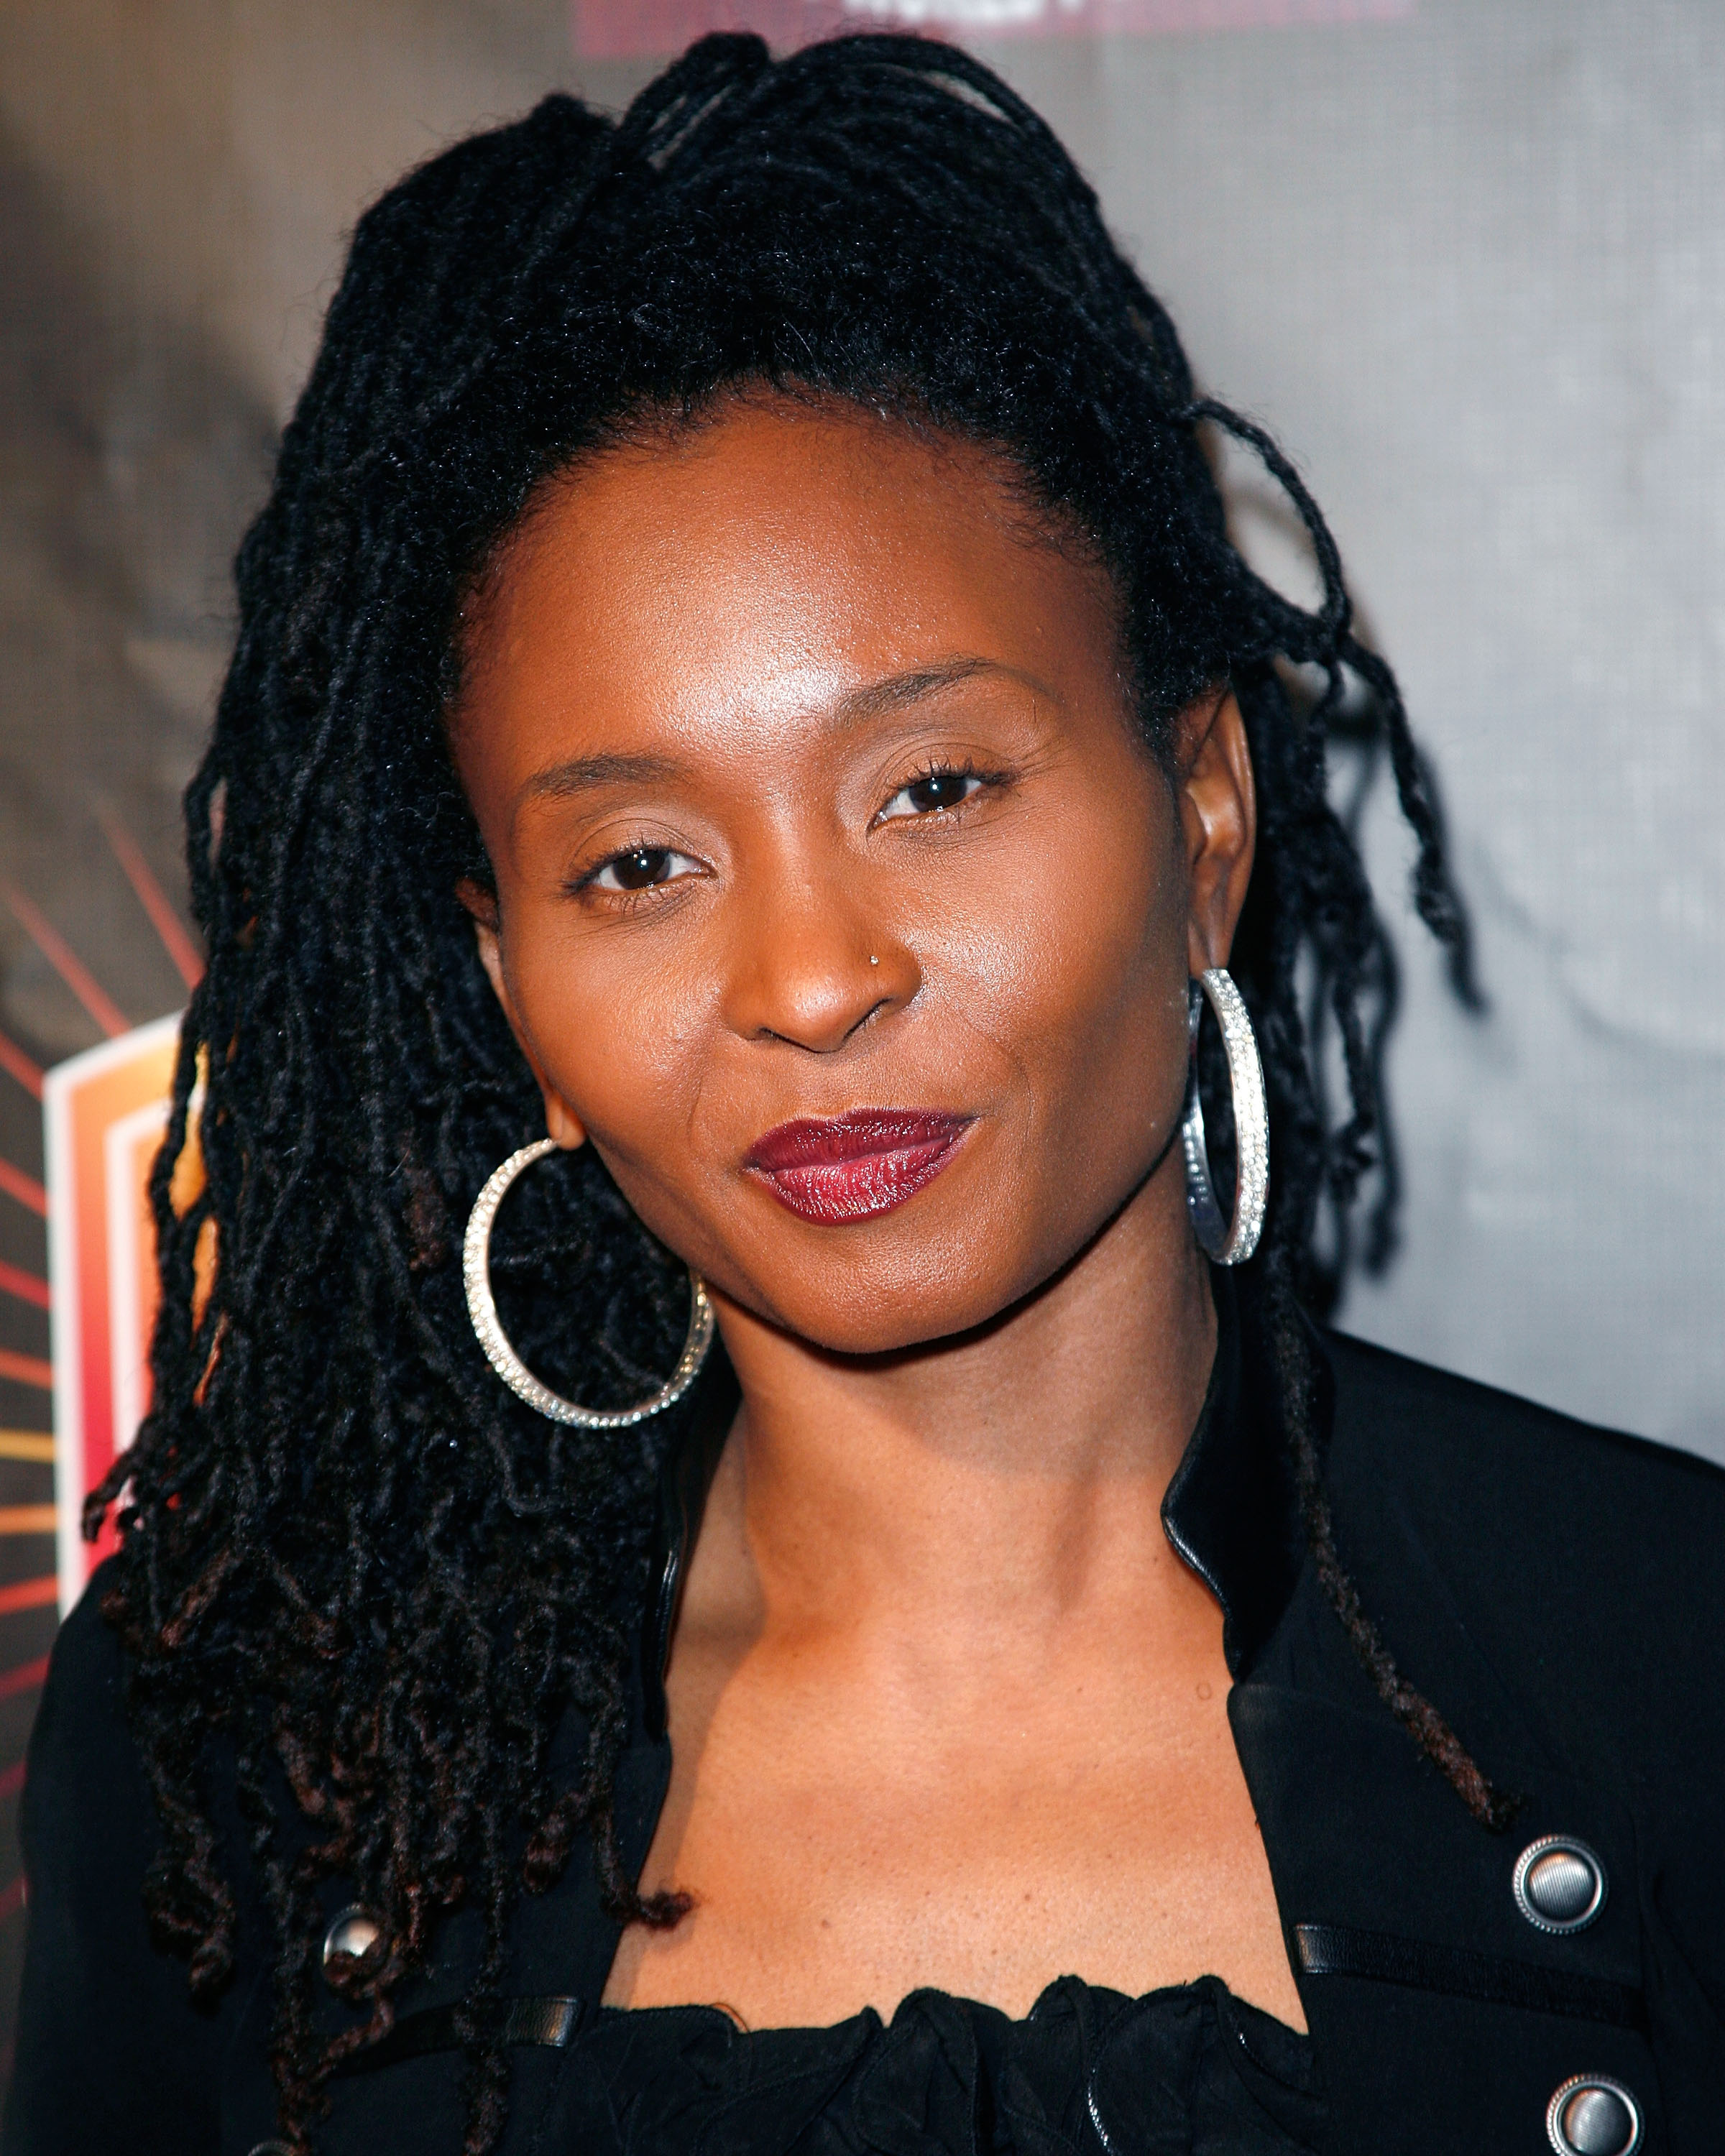 Rapper Dee Barnes arrives at the Luxury Book Launch of "Hip-Hop: A Cultural Odyssey" and the exhibit premiere at The GRAMMY Museum on Feb. 8, 2011, in Los Angeles. (Paul Archuleta—FilmMagic/Getty)